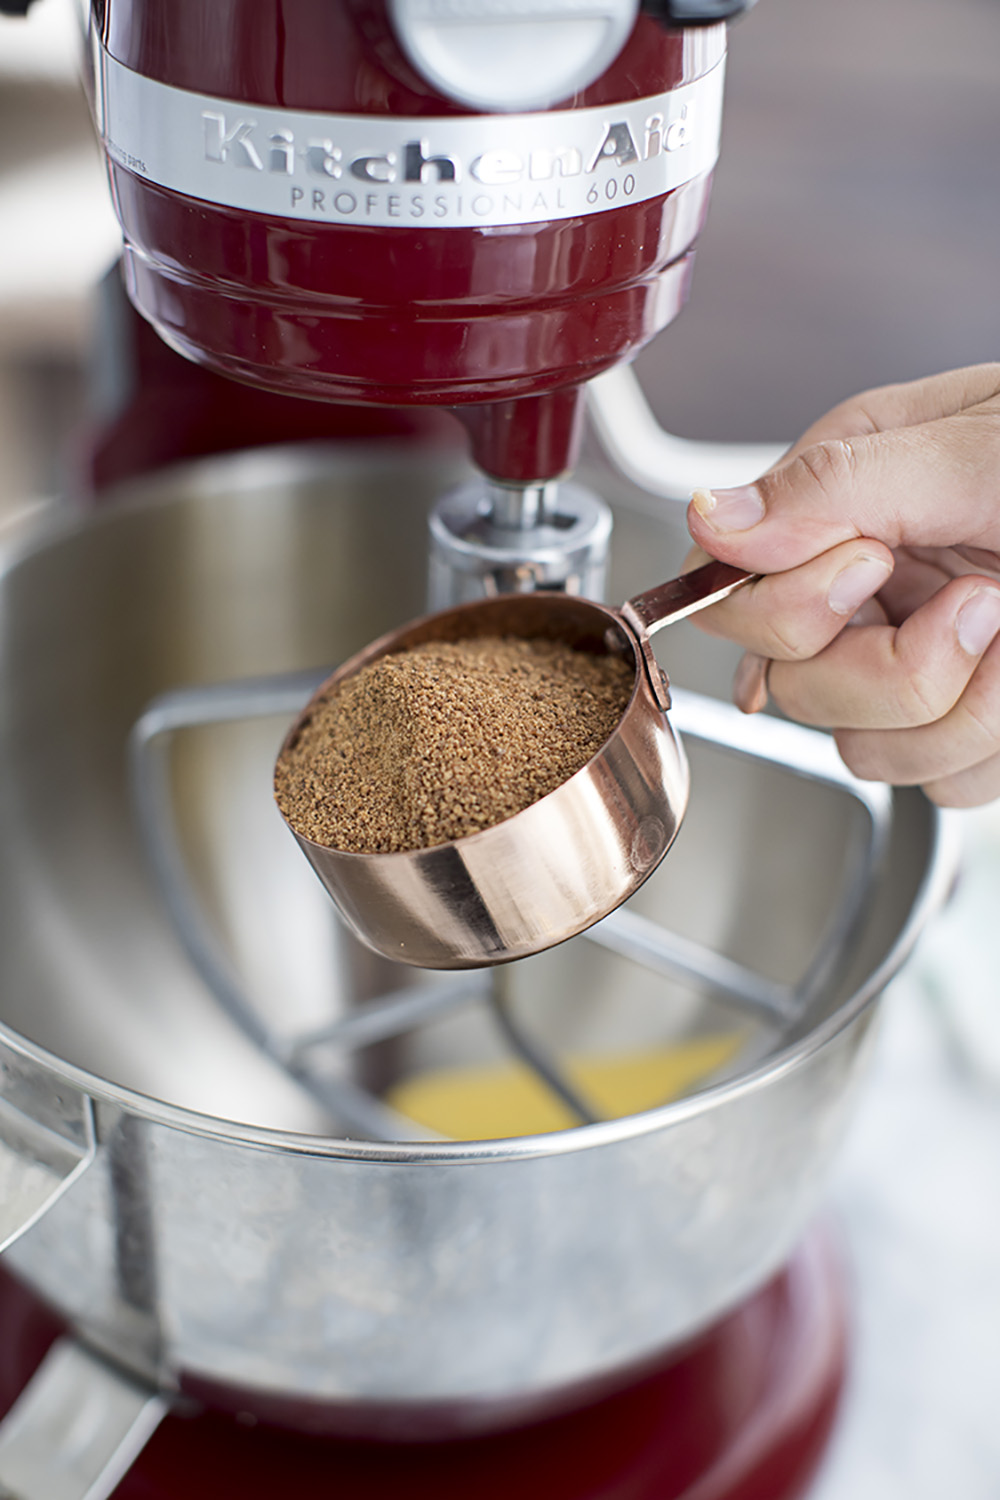 A person adding brown sugar to a stainless steel mixer.